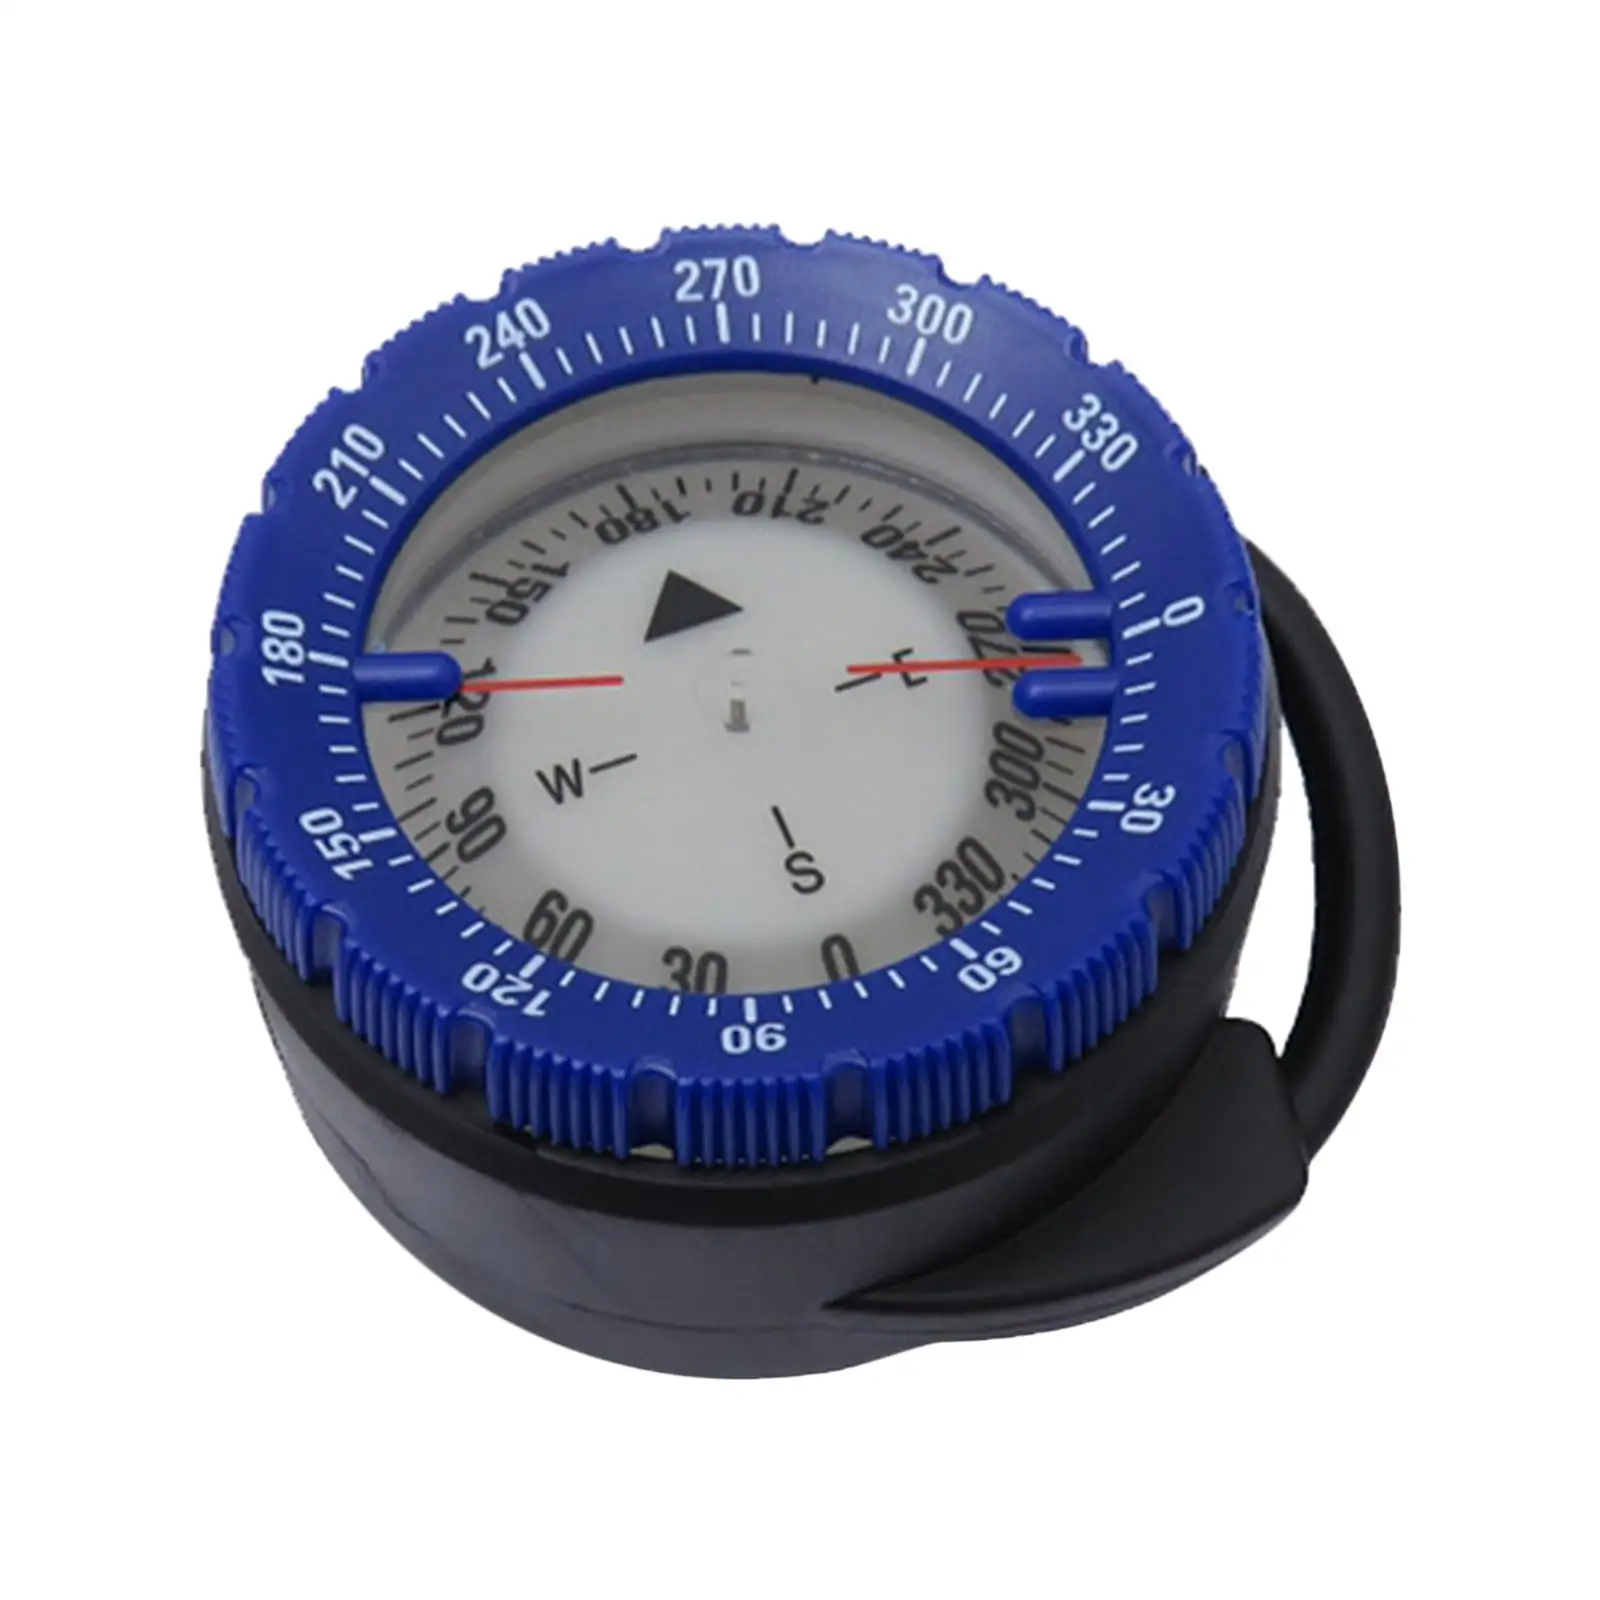 Camping Survival Compass Mini Pocket Compass for Outdoor Hiking Orienteering